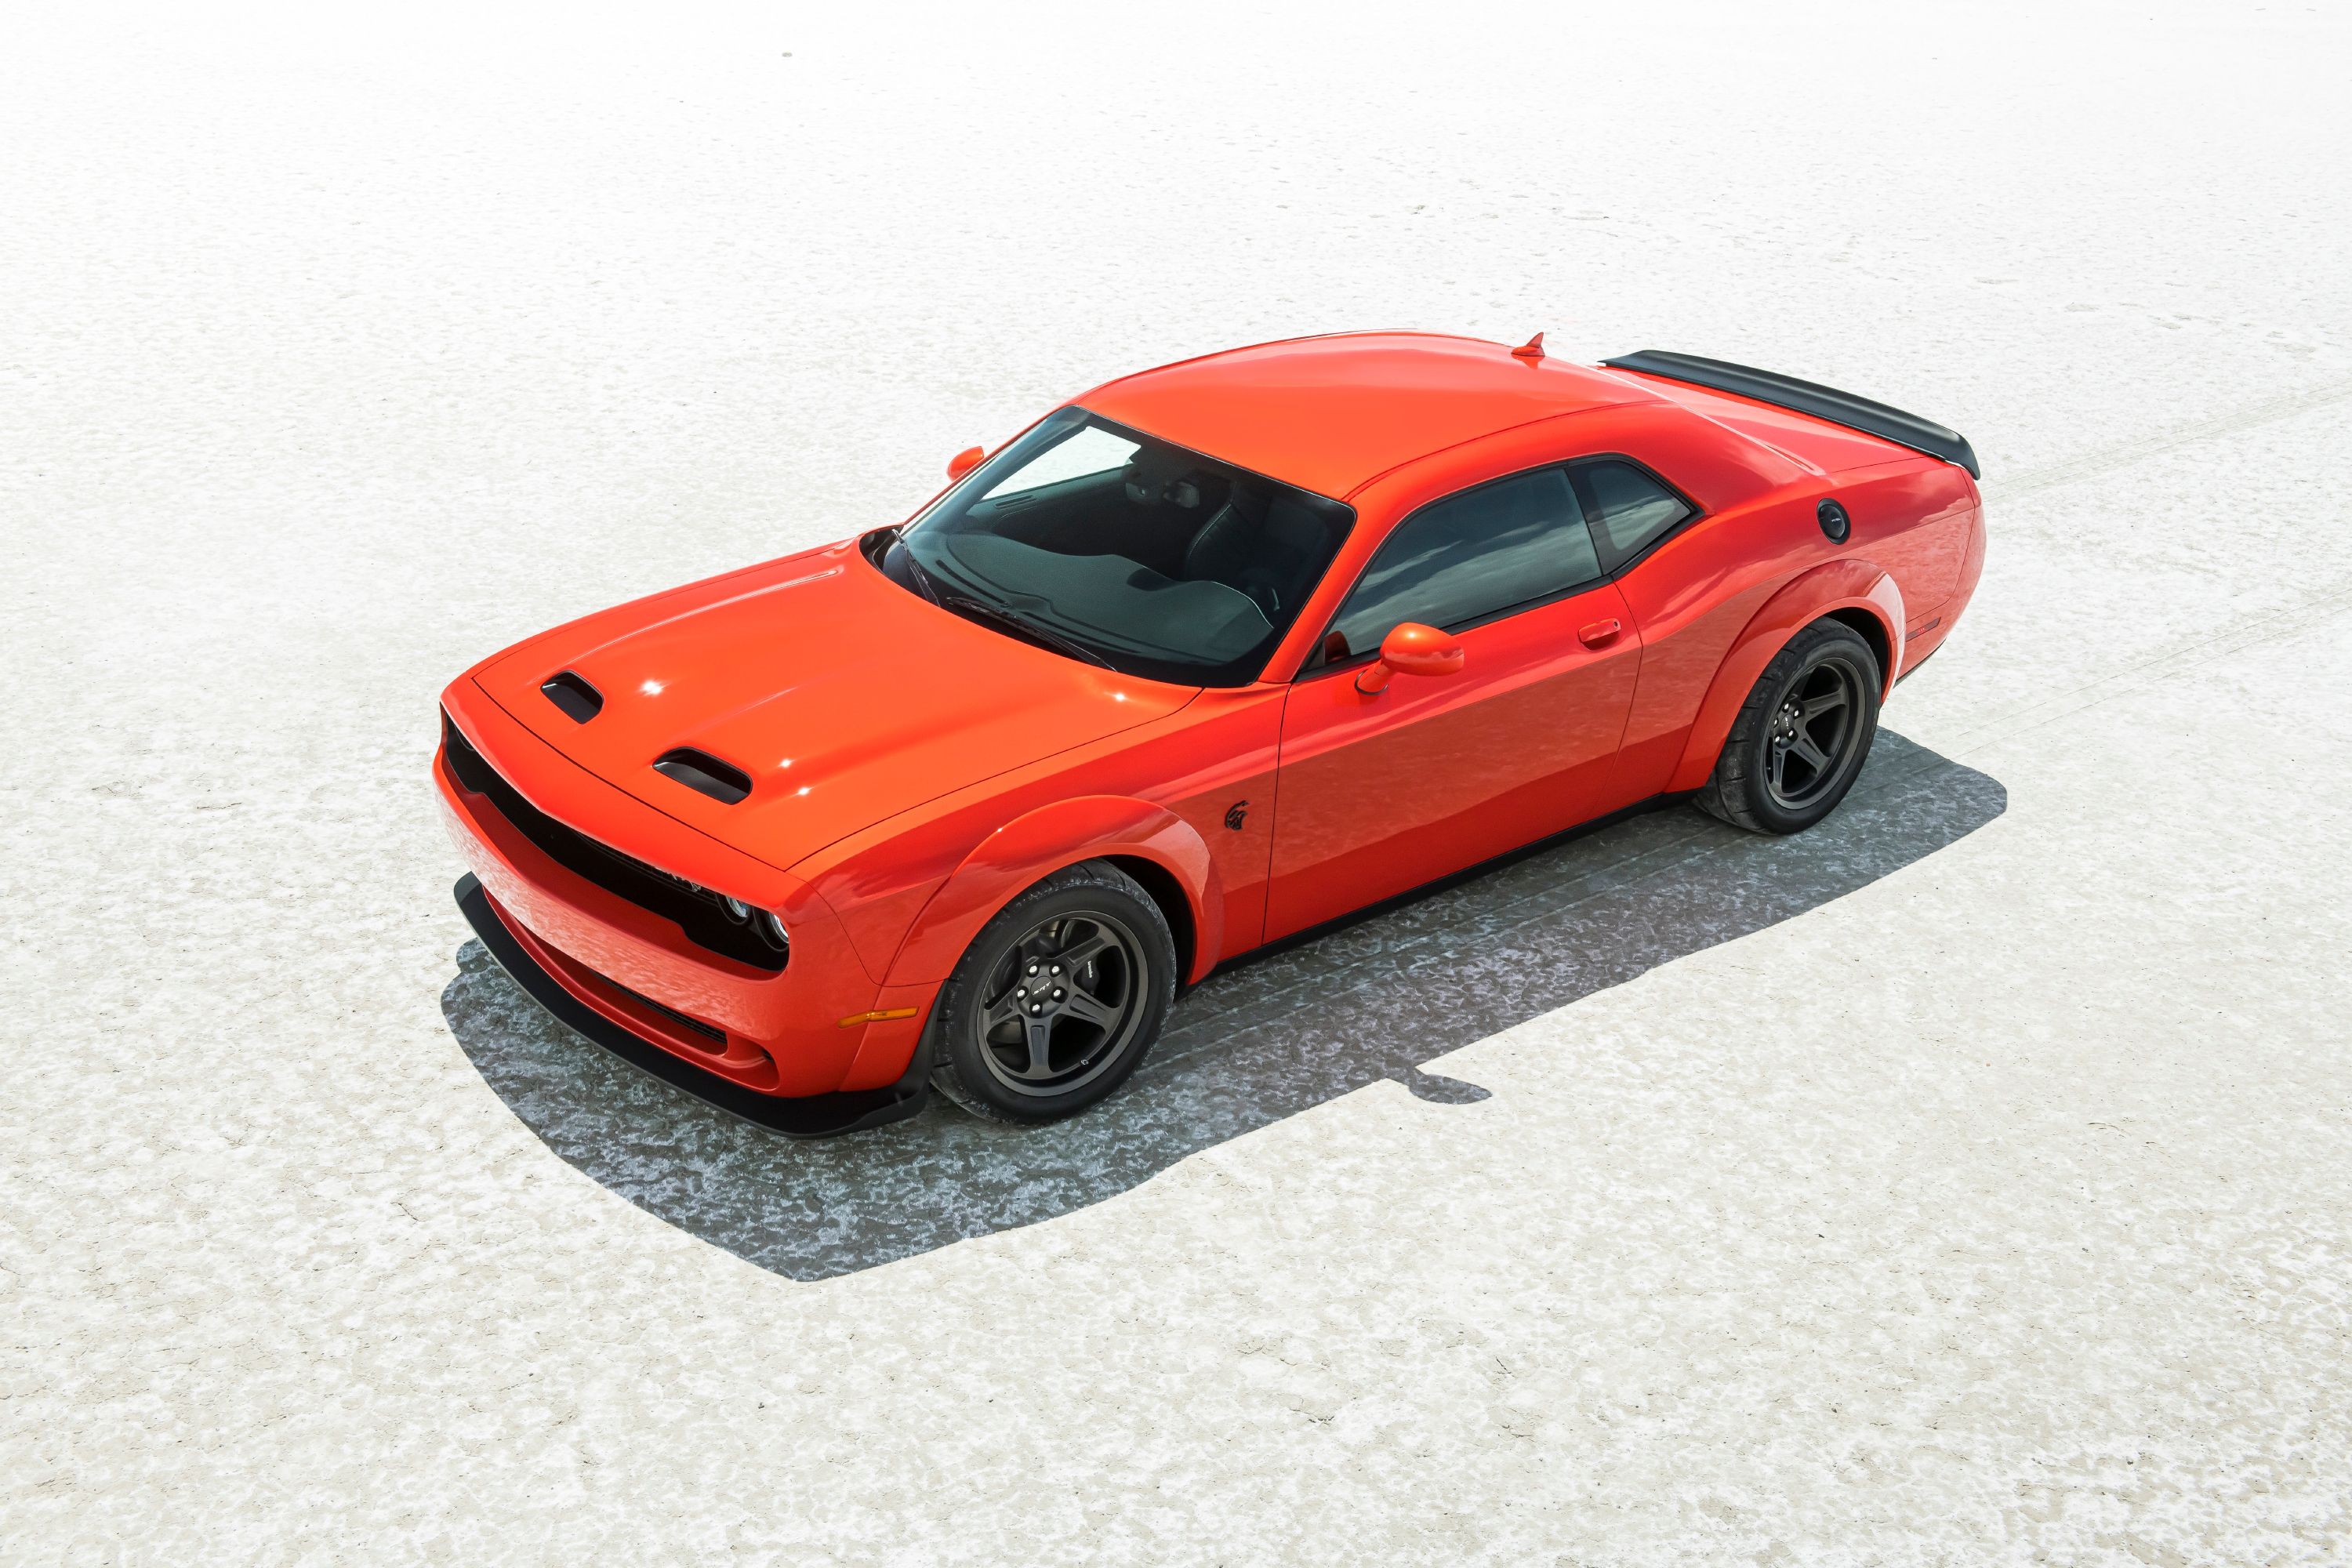 2020 2020 Dodge Challenger SRT Super Stock Arrives As The World’s Quickest and Most Powerful Muscle Car